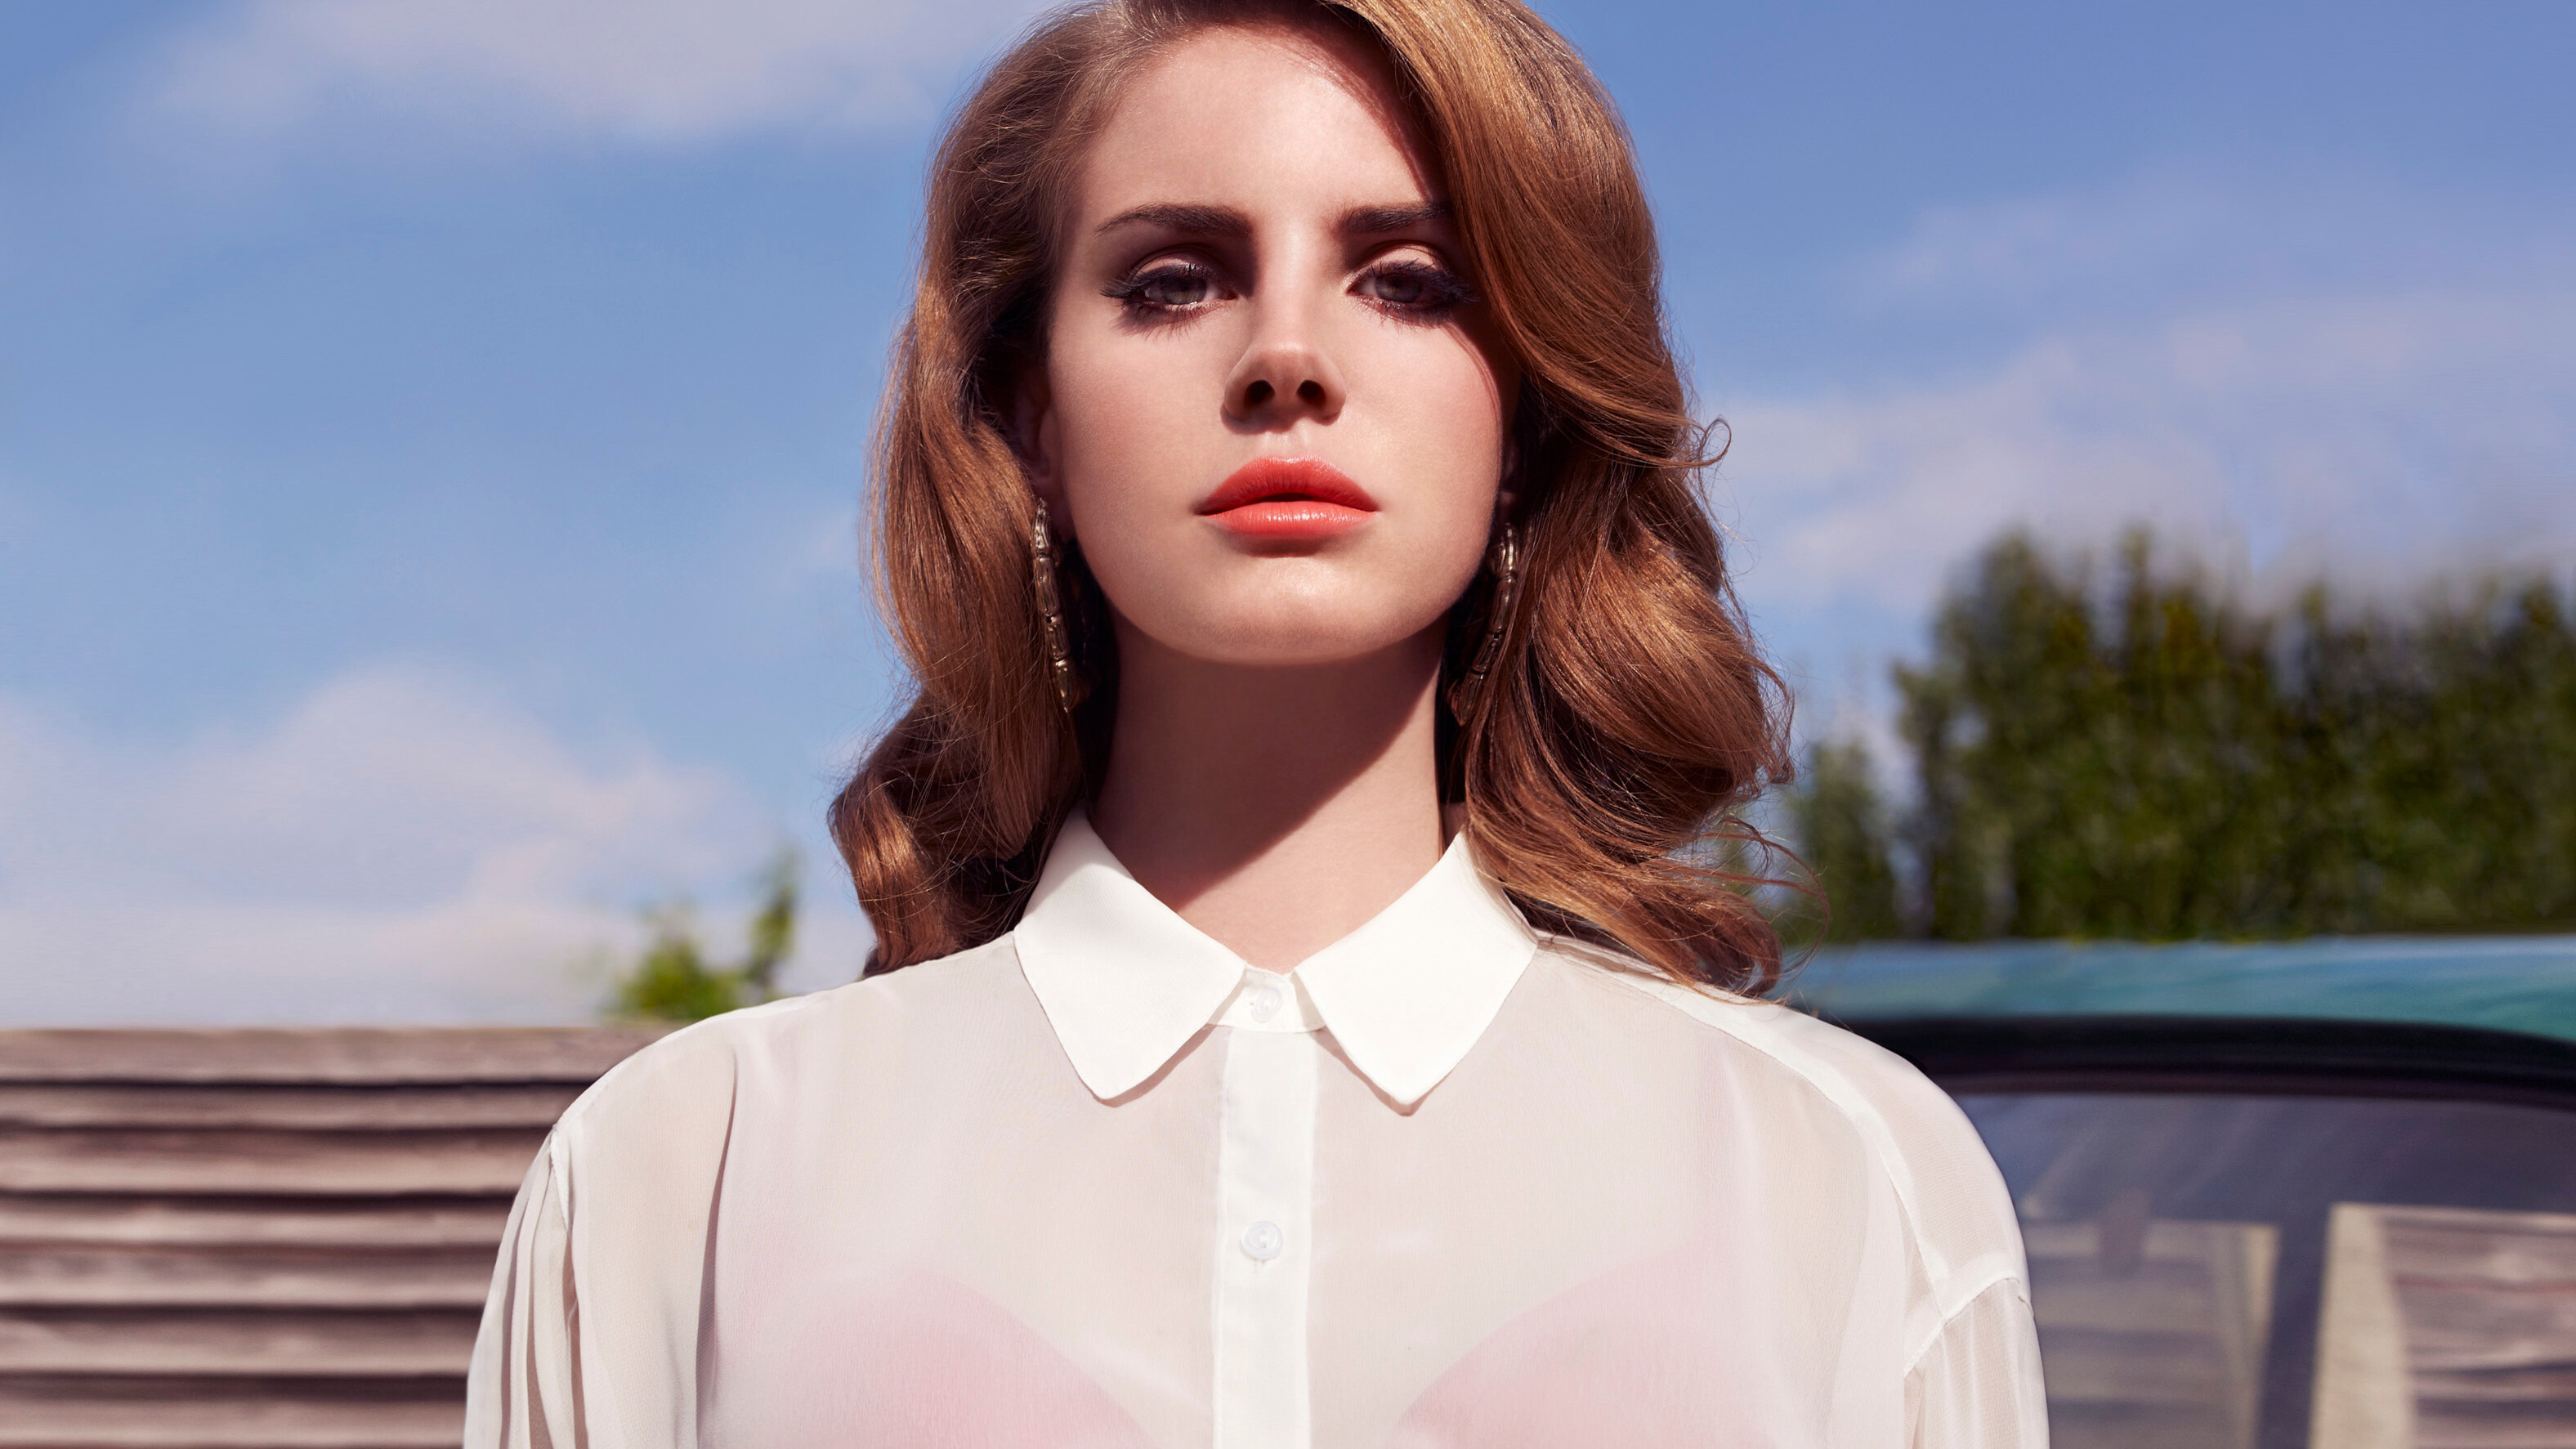 Lana Del Rey: Second album, Born to Die, The sleeper hit "Summertime Sadness", 2012. 3160x1780 HD Background.